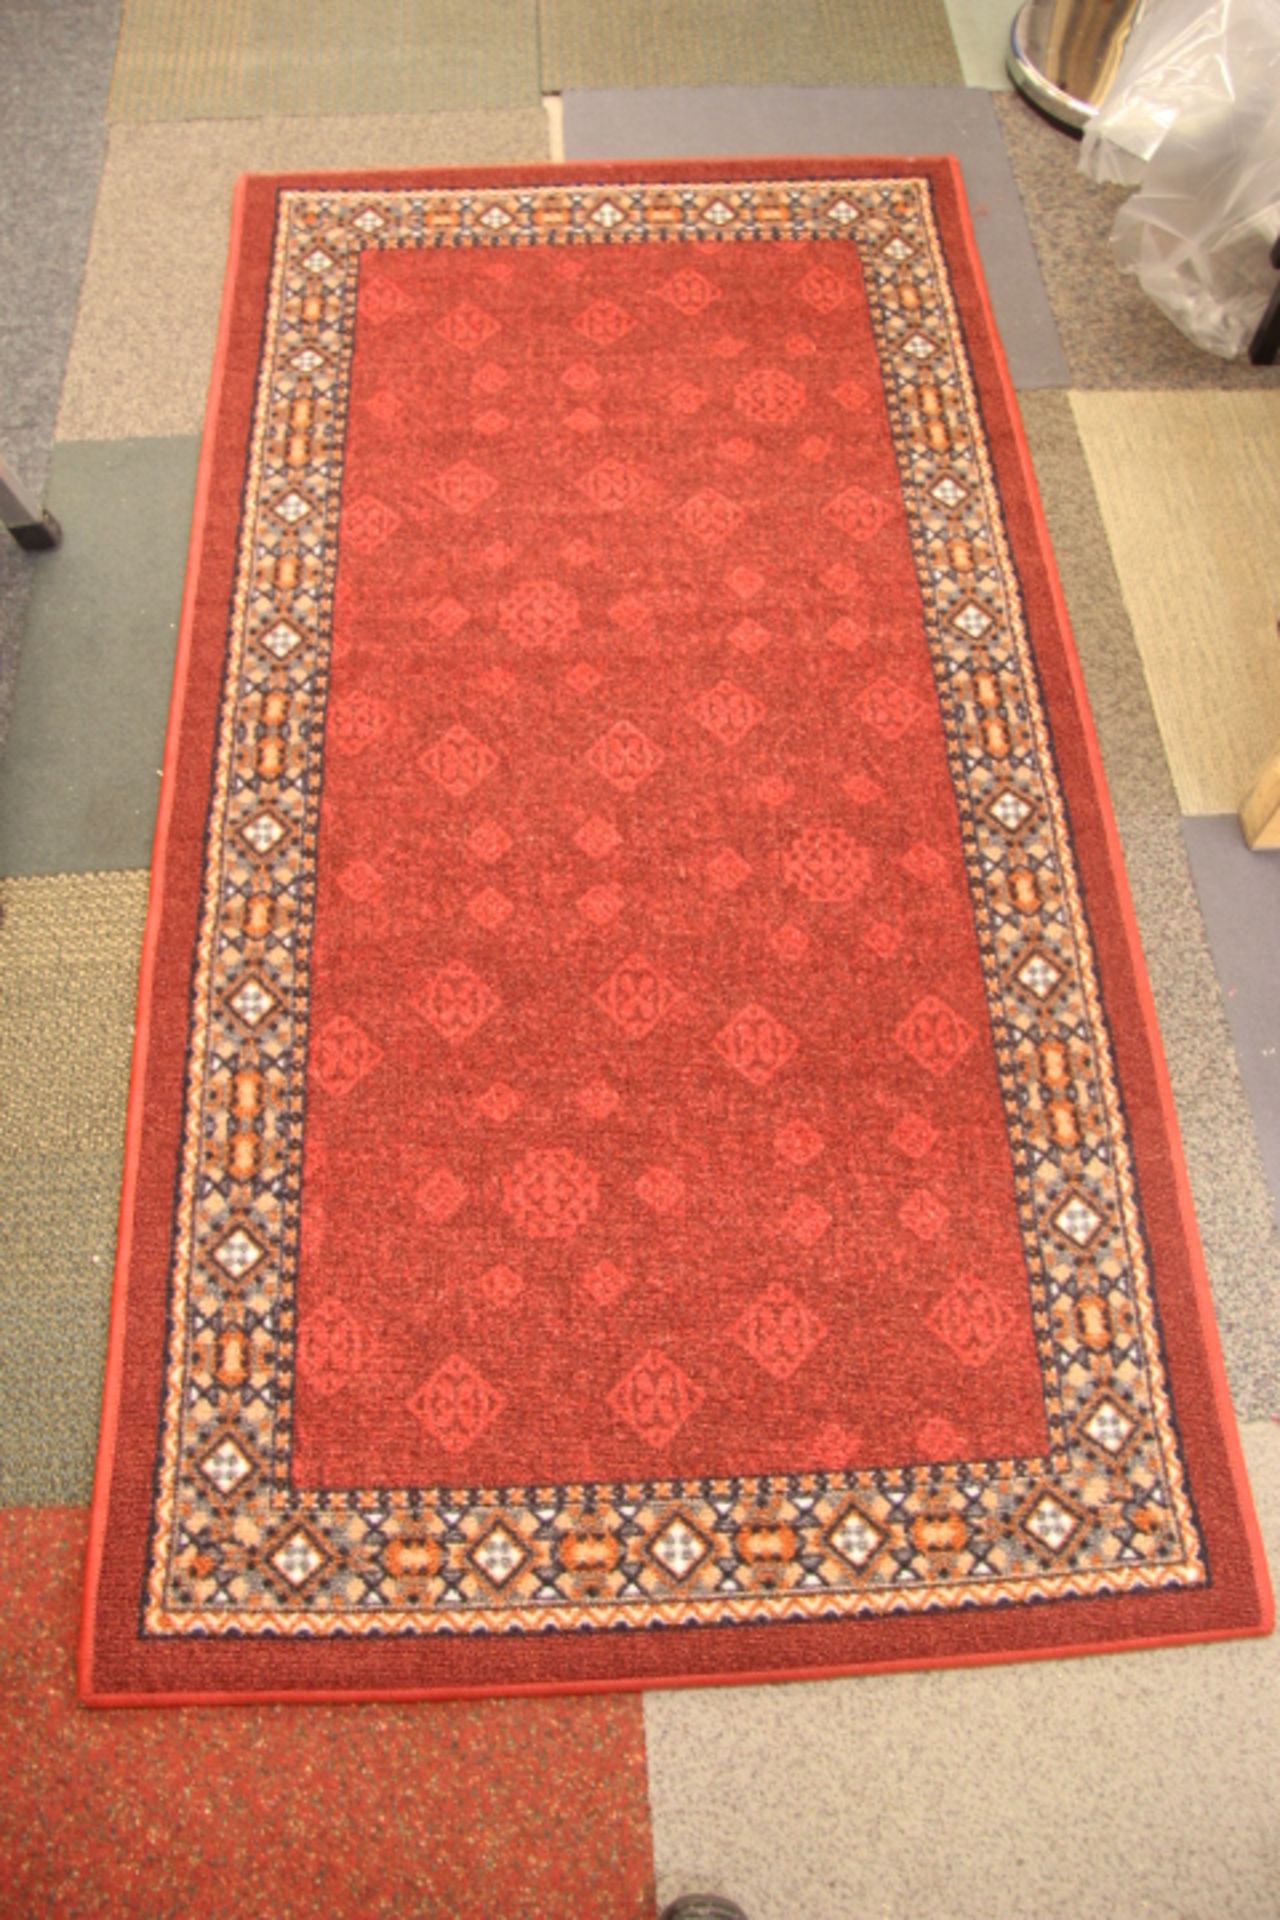 V Brand New 80 X 150cm Burgundy Decorative Rug X 2 YOUR BID PRICE TO BE MULTIPLIED BY TWO